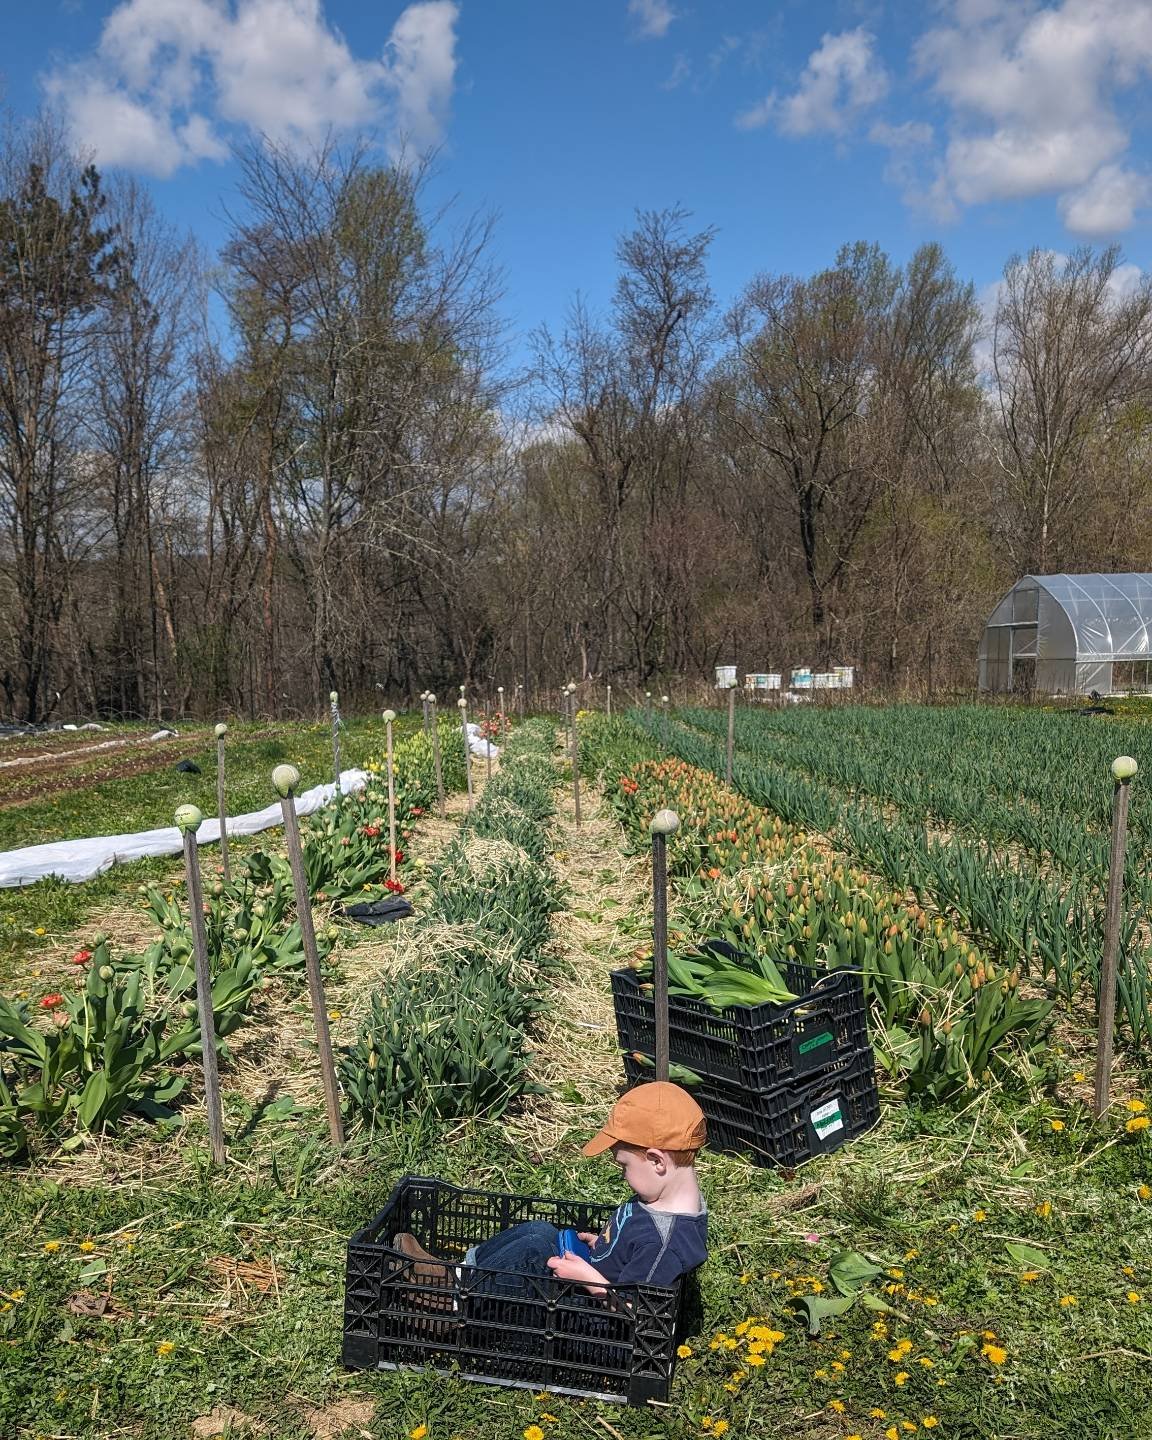 Sunny blue sky days have woken up the tulips and we've been busy harvesting lots of beauties for you. You can find our Hudson Valley grown, organic tulips this Sunday at Carroll Gardens for our first market back! Also available for pickup at the farm